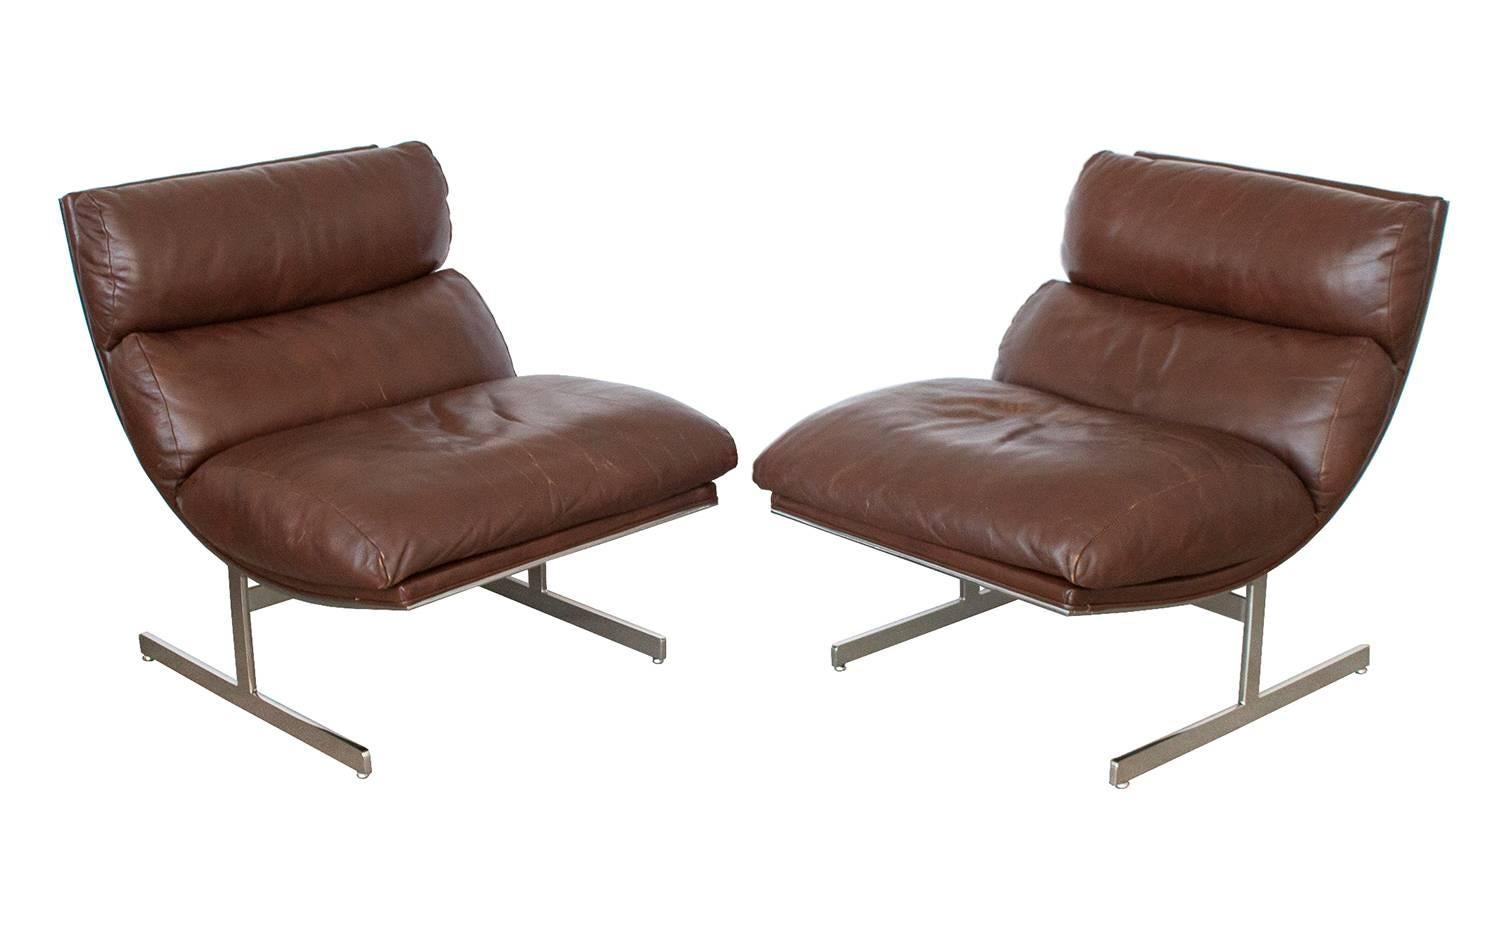 Pair of Kipp Stewart chrome and leather lounge chairs for Directional. Unique scoop curved design. Original chocolate brown leather. Chrome-plated seamless steel frames which frame the entire back of the chair. Beautifully broken in leather shows